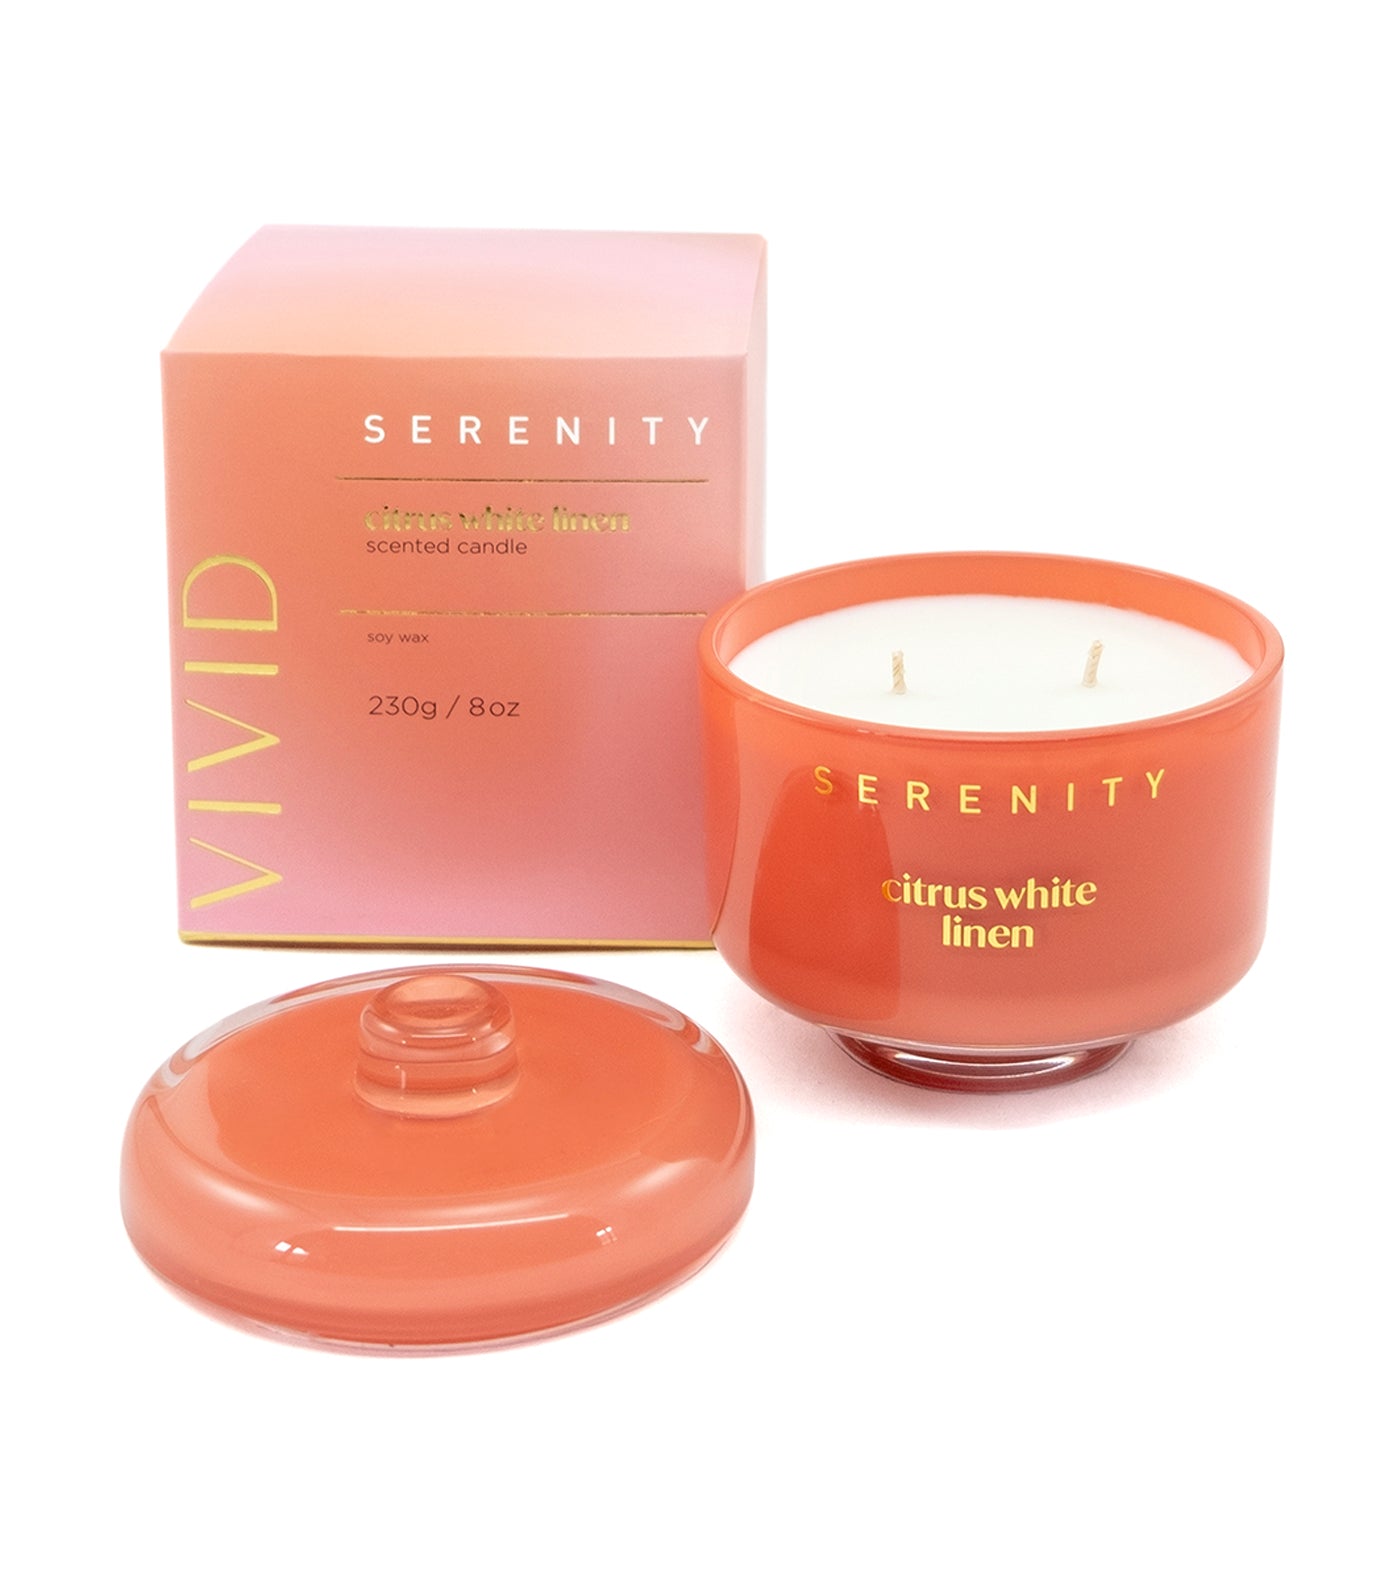 serenity vivid citrus white linen scented candle